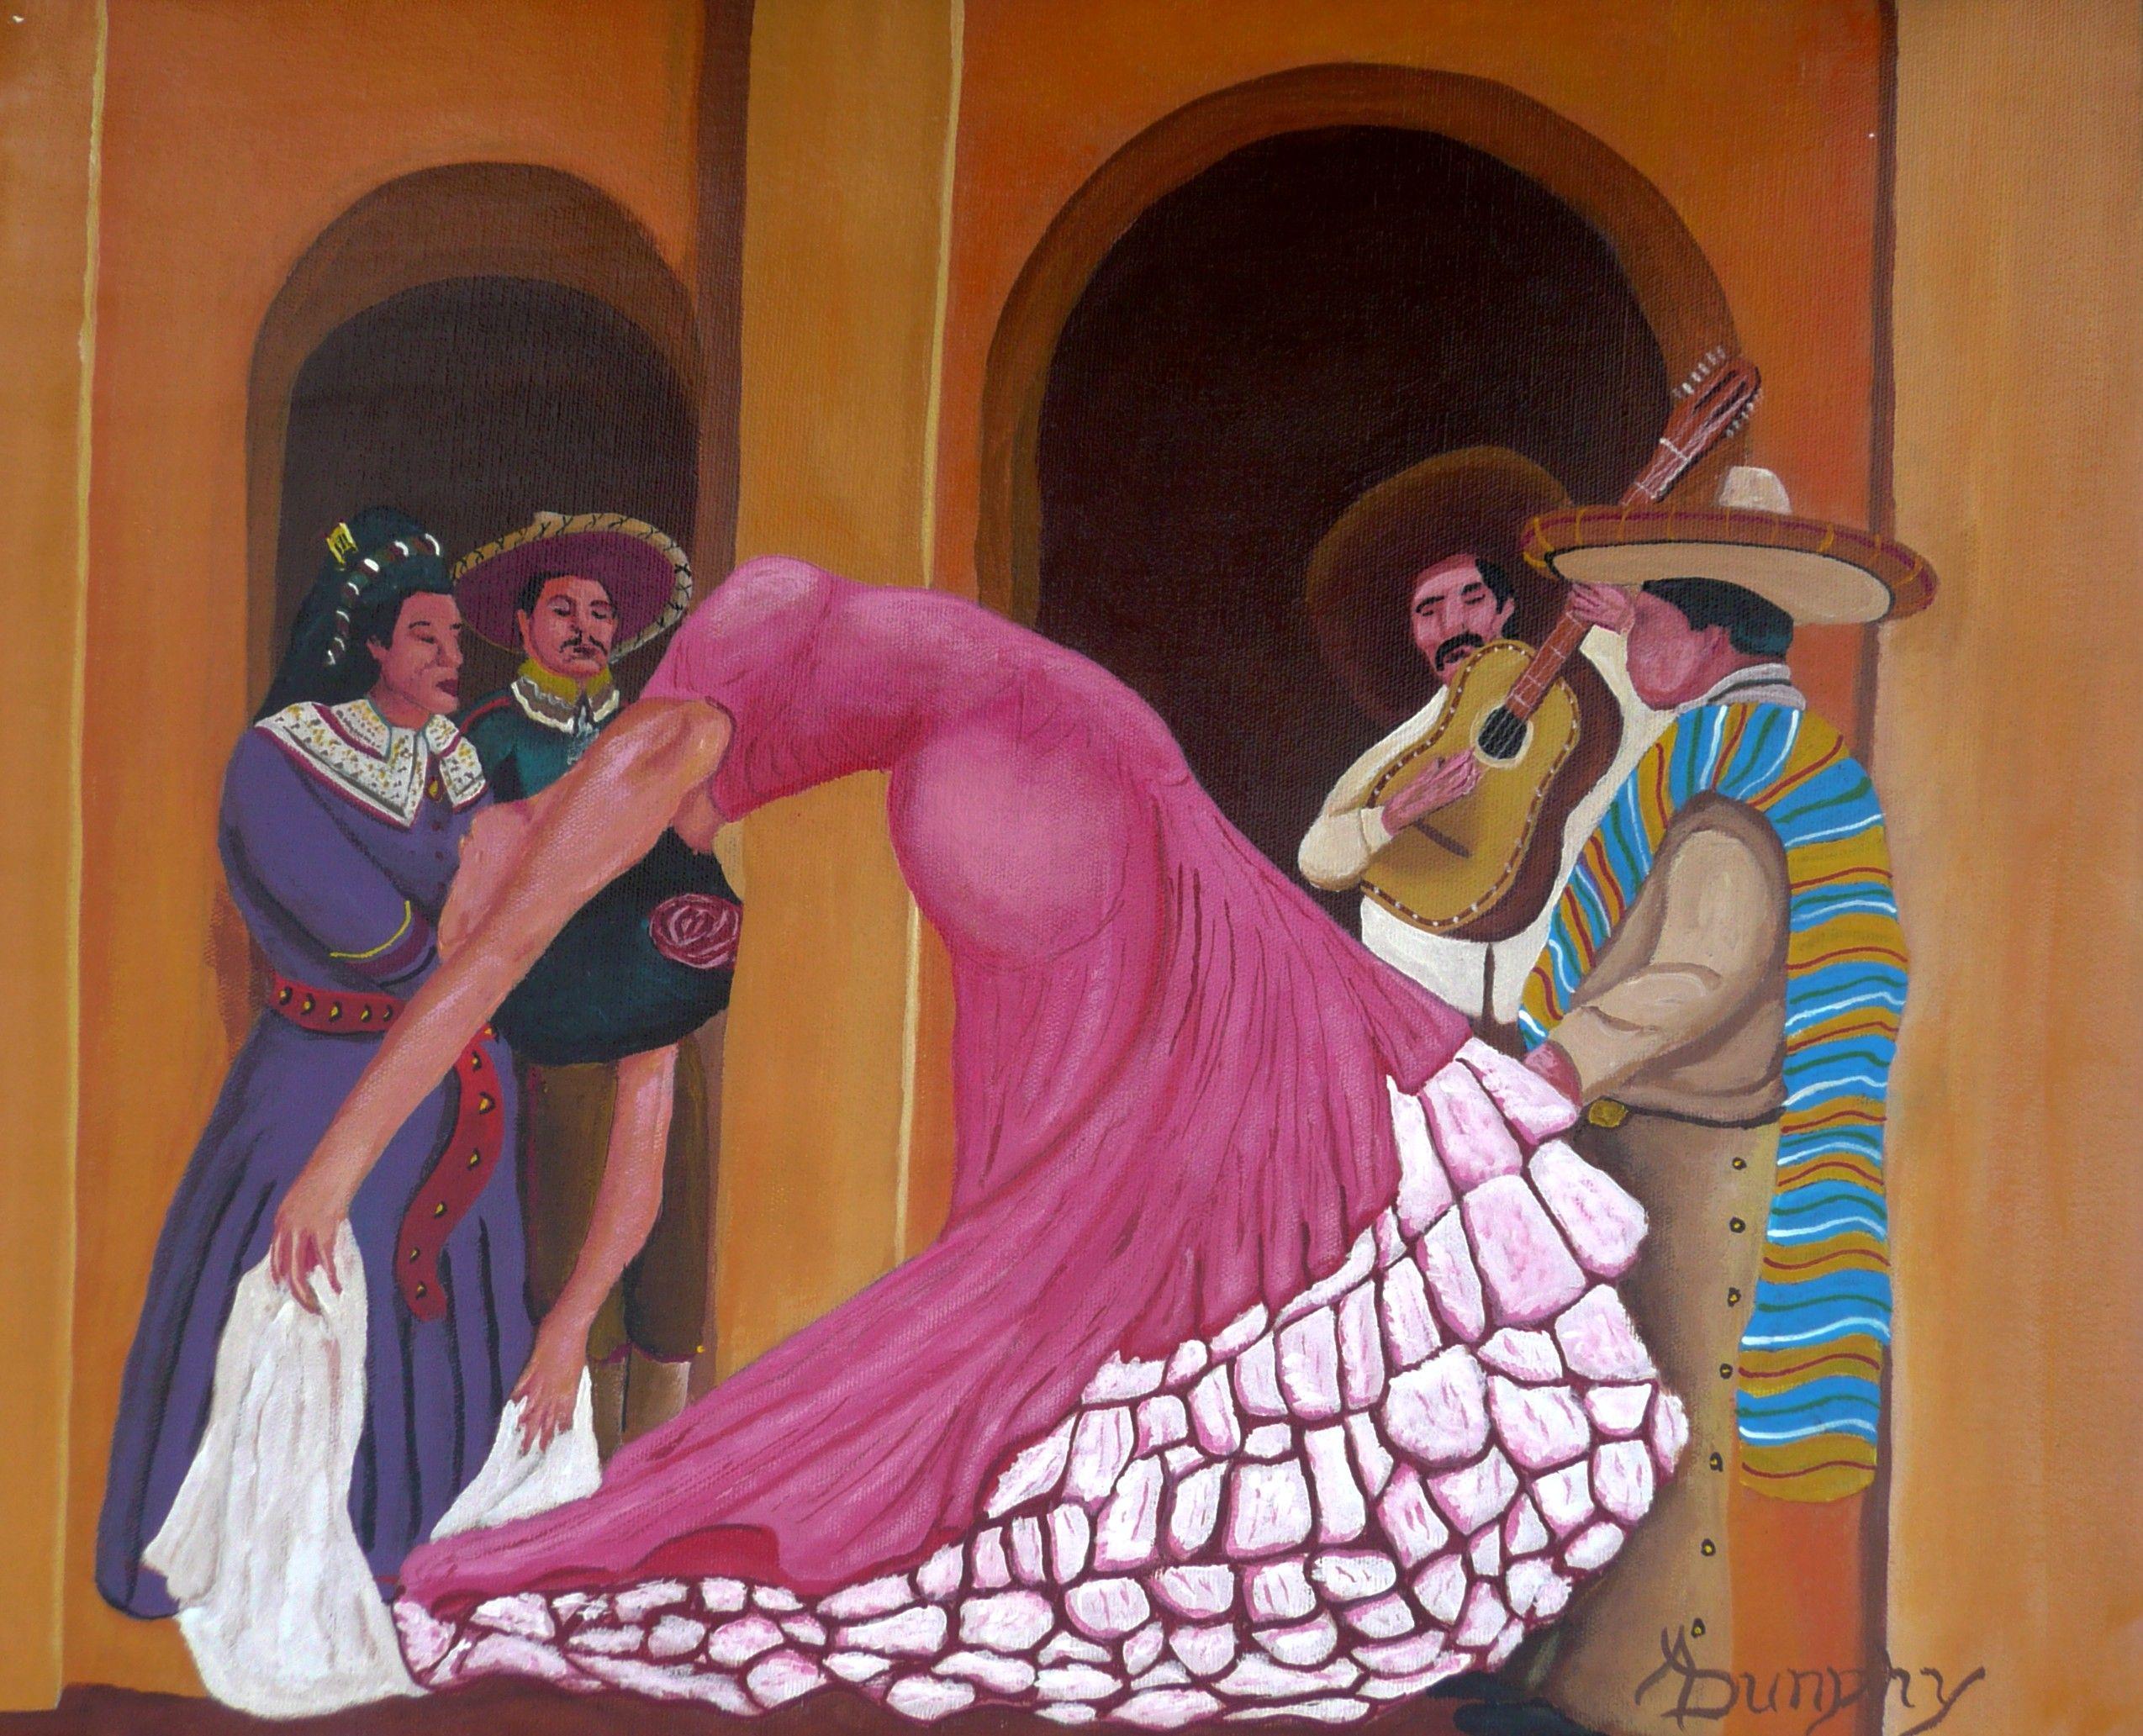 In Mexico there are many reasons to have a Fiesta or celebration. In this scene the guitar is playing as the lady dances to the delight of the audience. This painting has been created using only professional grade acrylics on a flat sheet of